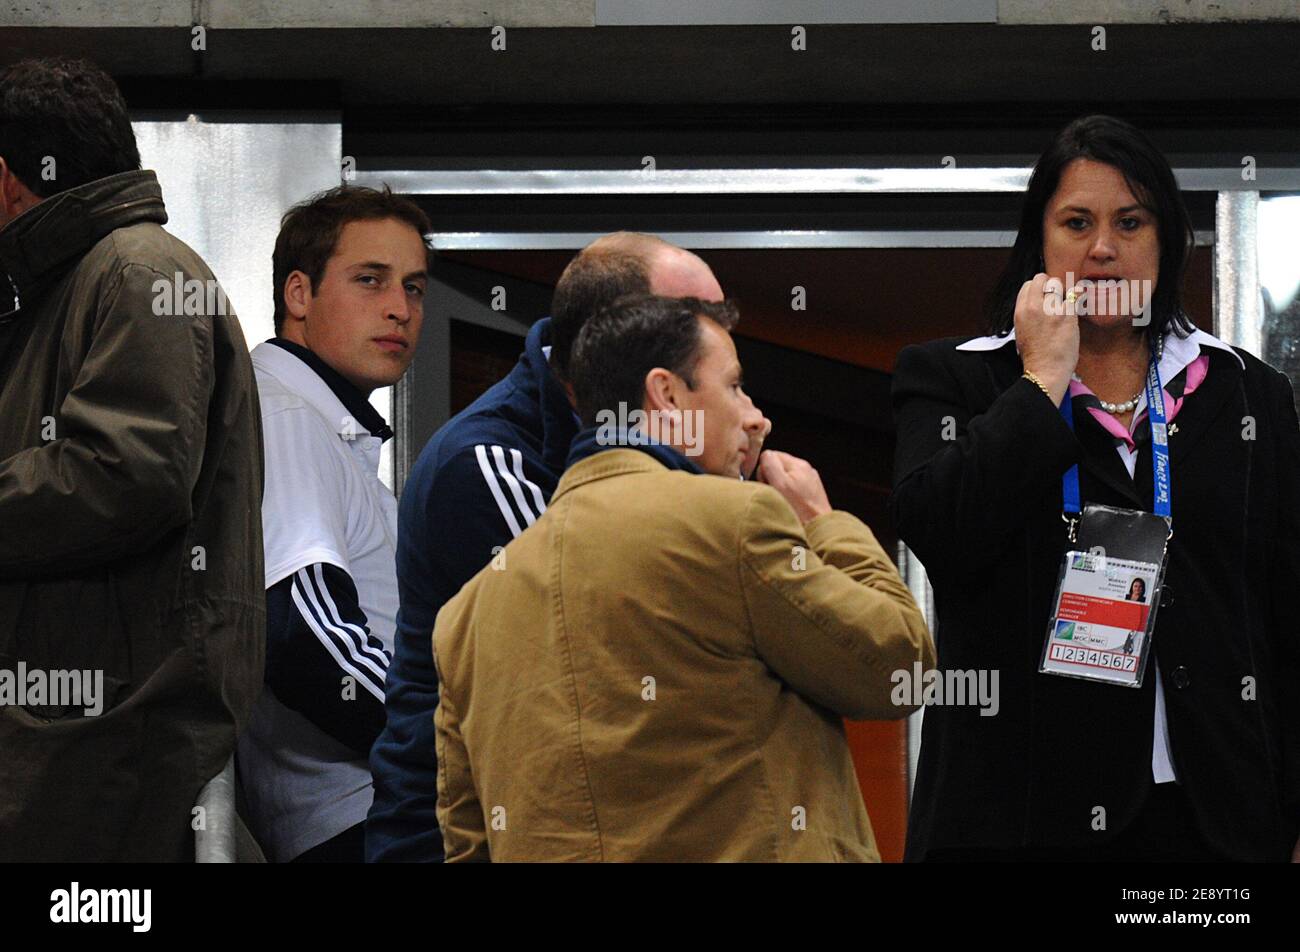 Prince William attends the IRB Rugby World Cup 2007, Final, England vs South Africa at the Stade de France in Saint-Denis near Paris, France on October 20, 2007. Photo by Gouhier-Morton-Taamallah/Cameleon/ABACAPRESS.COM Stock Photo